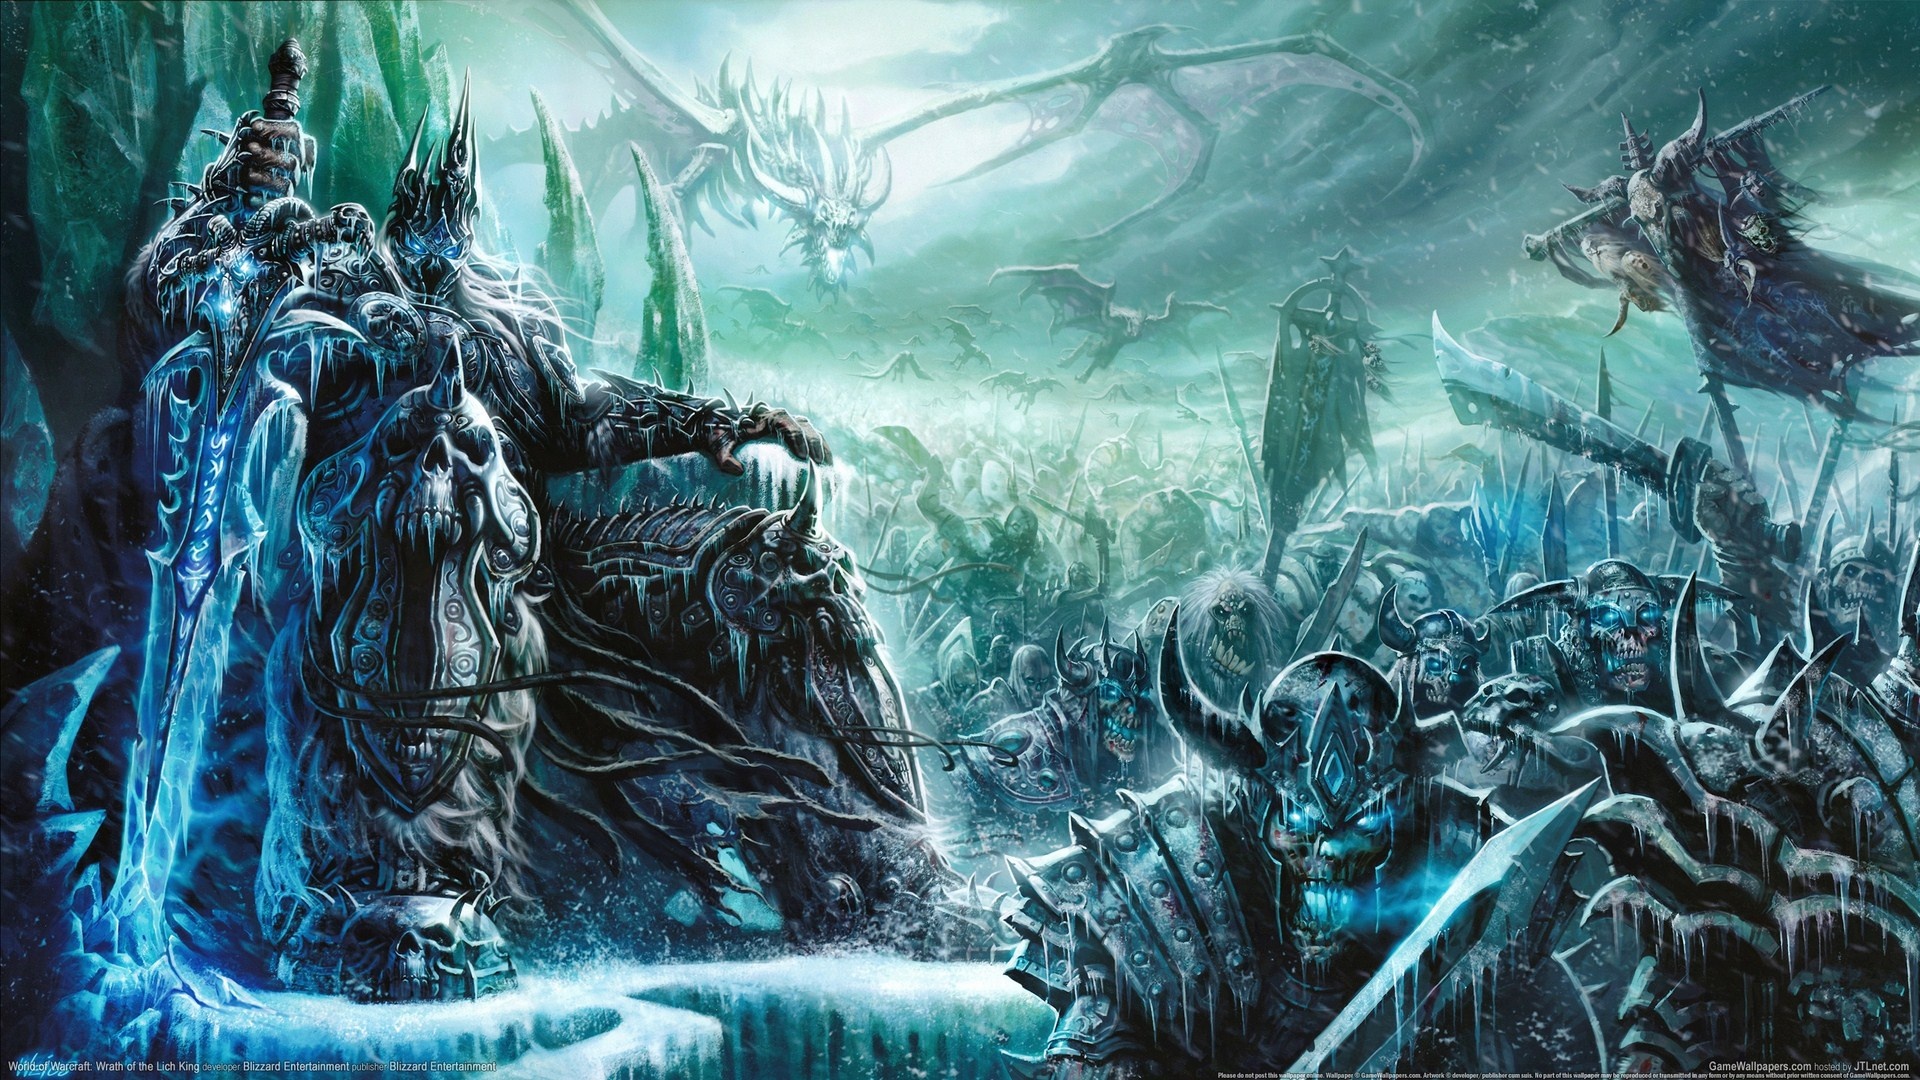 World of Warcraft Wrath of the Lich King Wallpaper Desktop Wallpapers